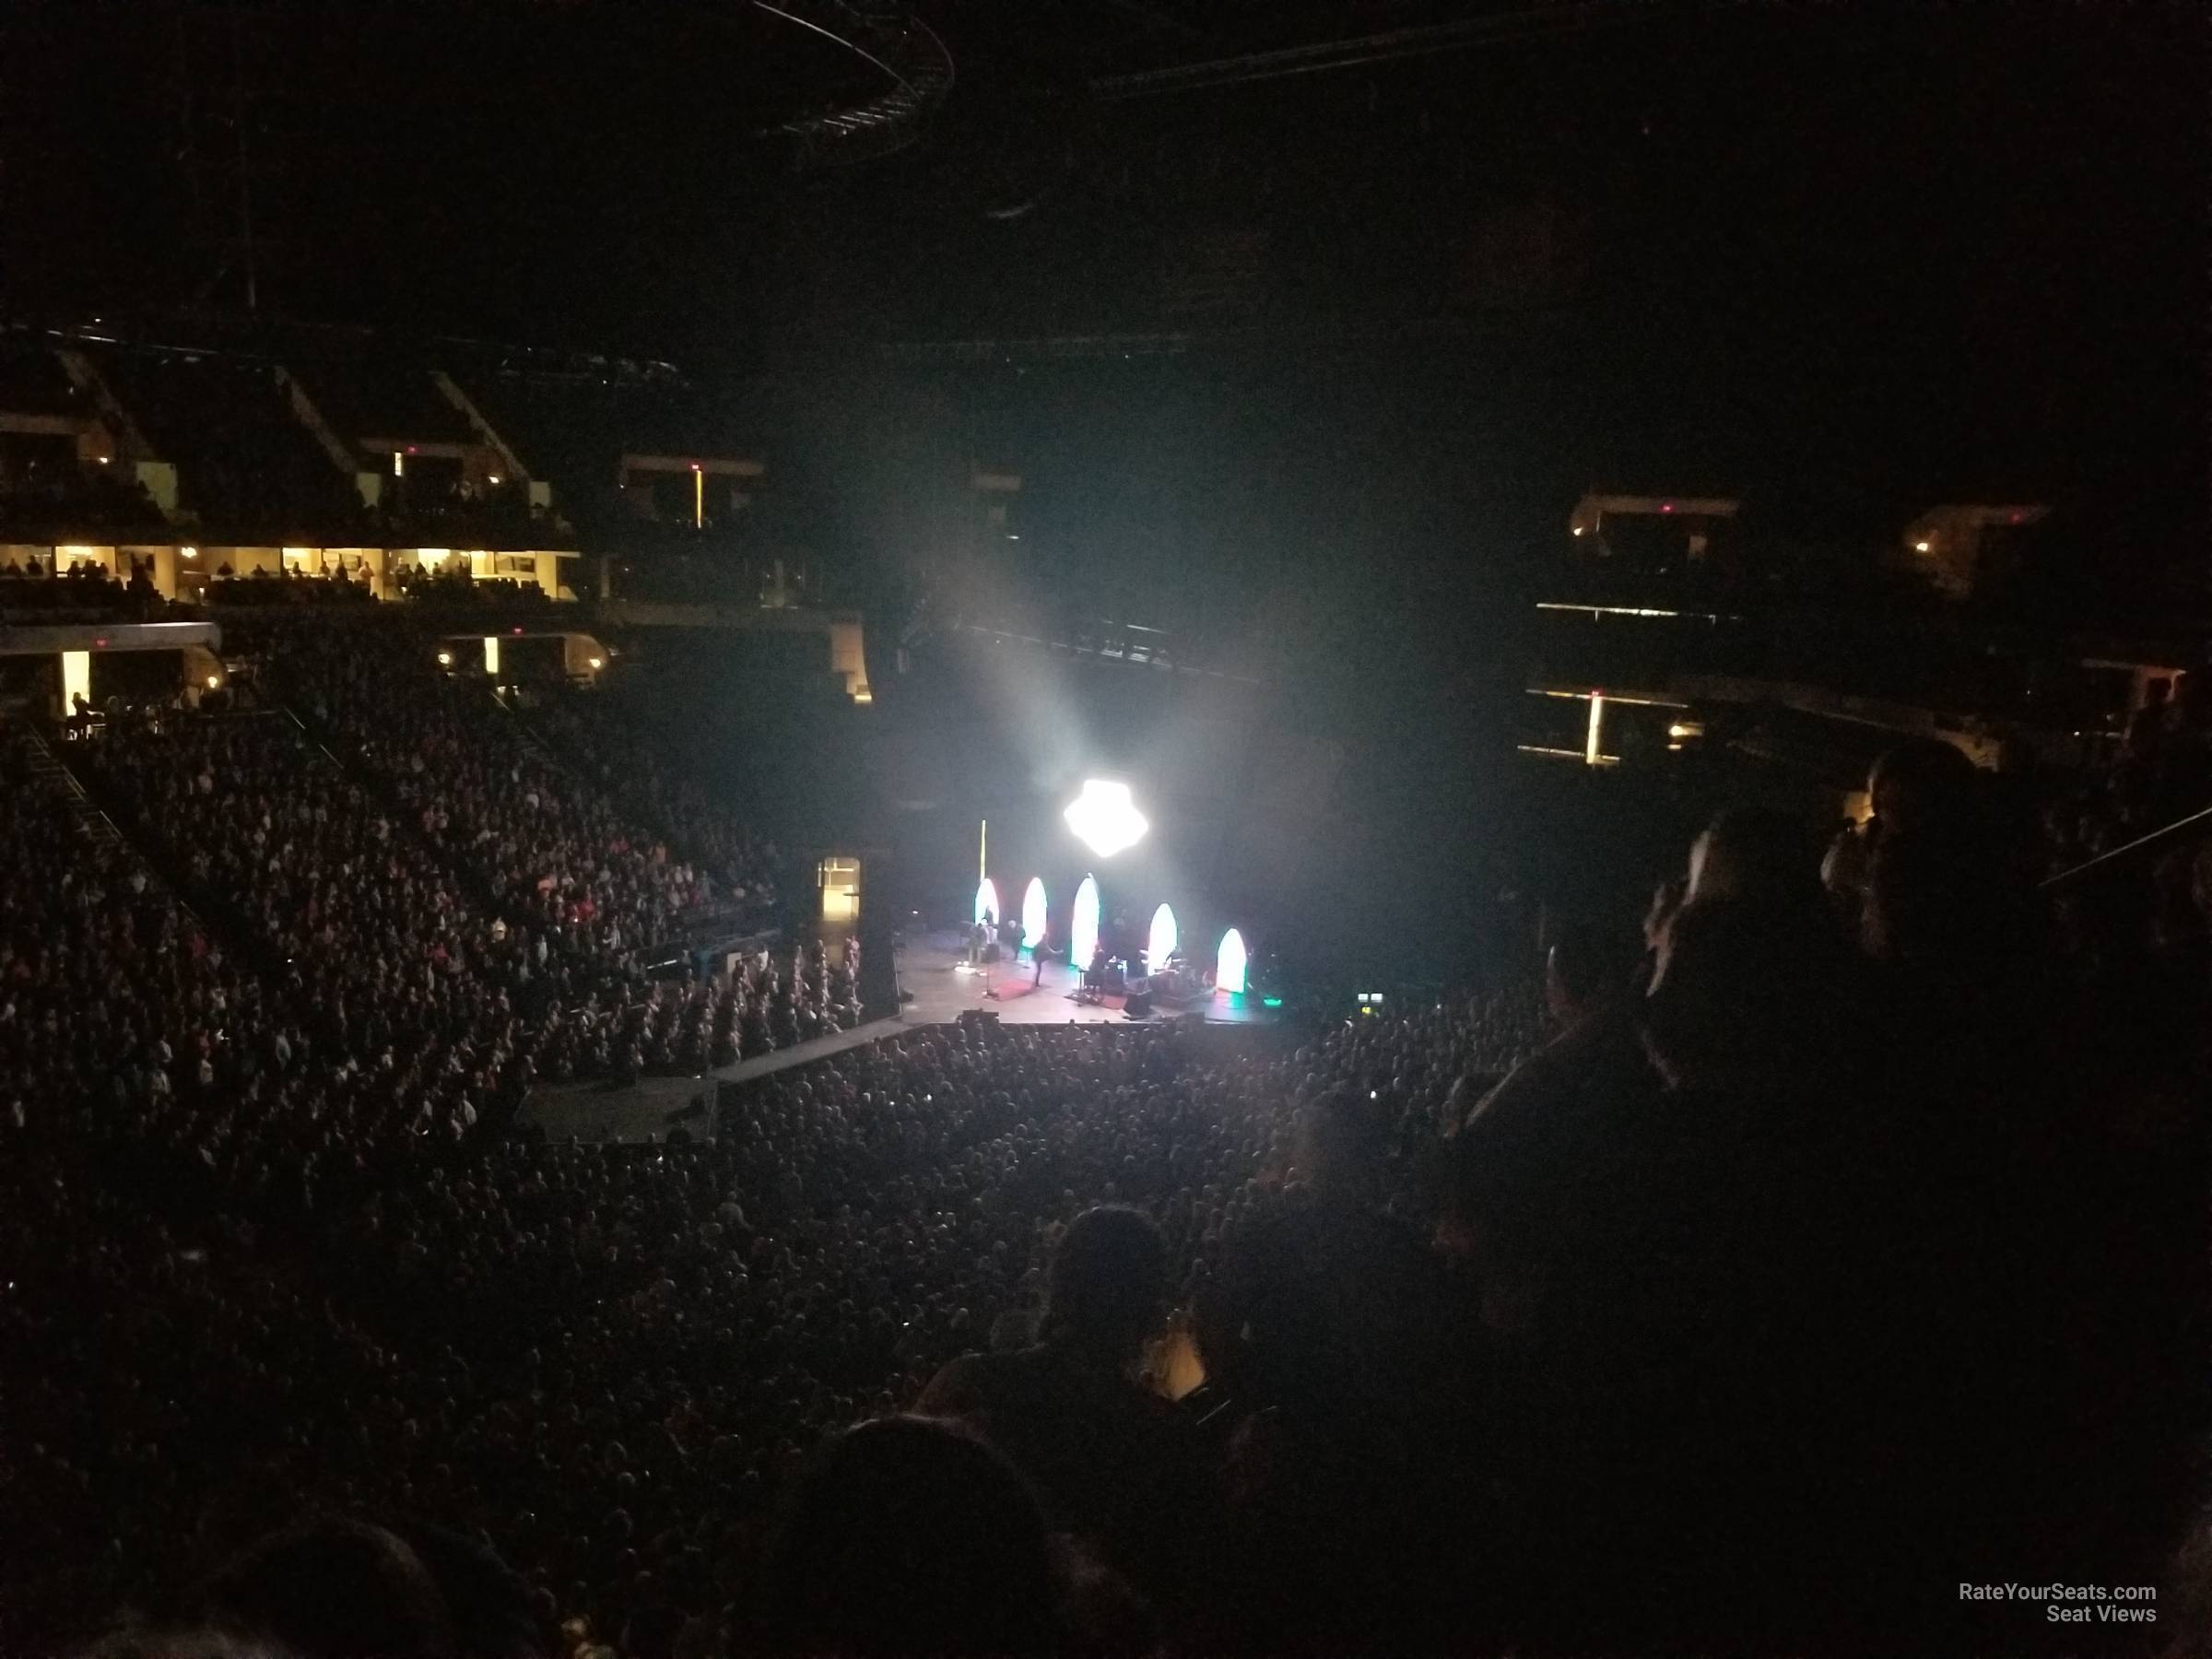 section 233, row c seat view  for concert - target center